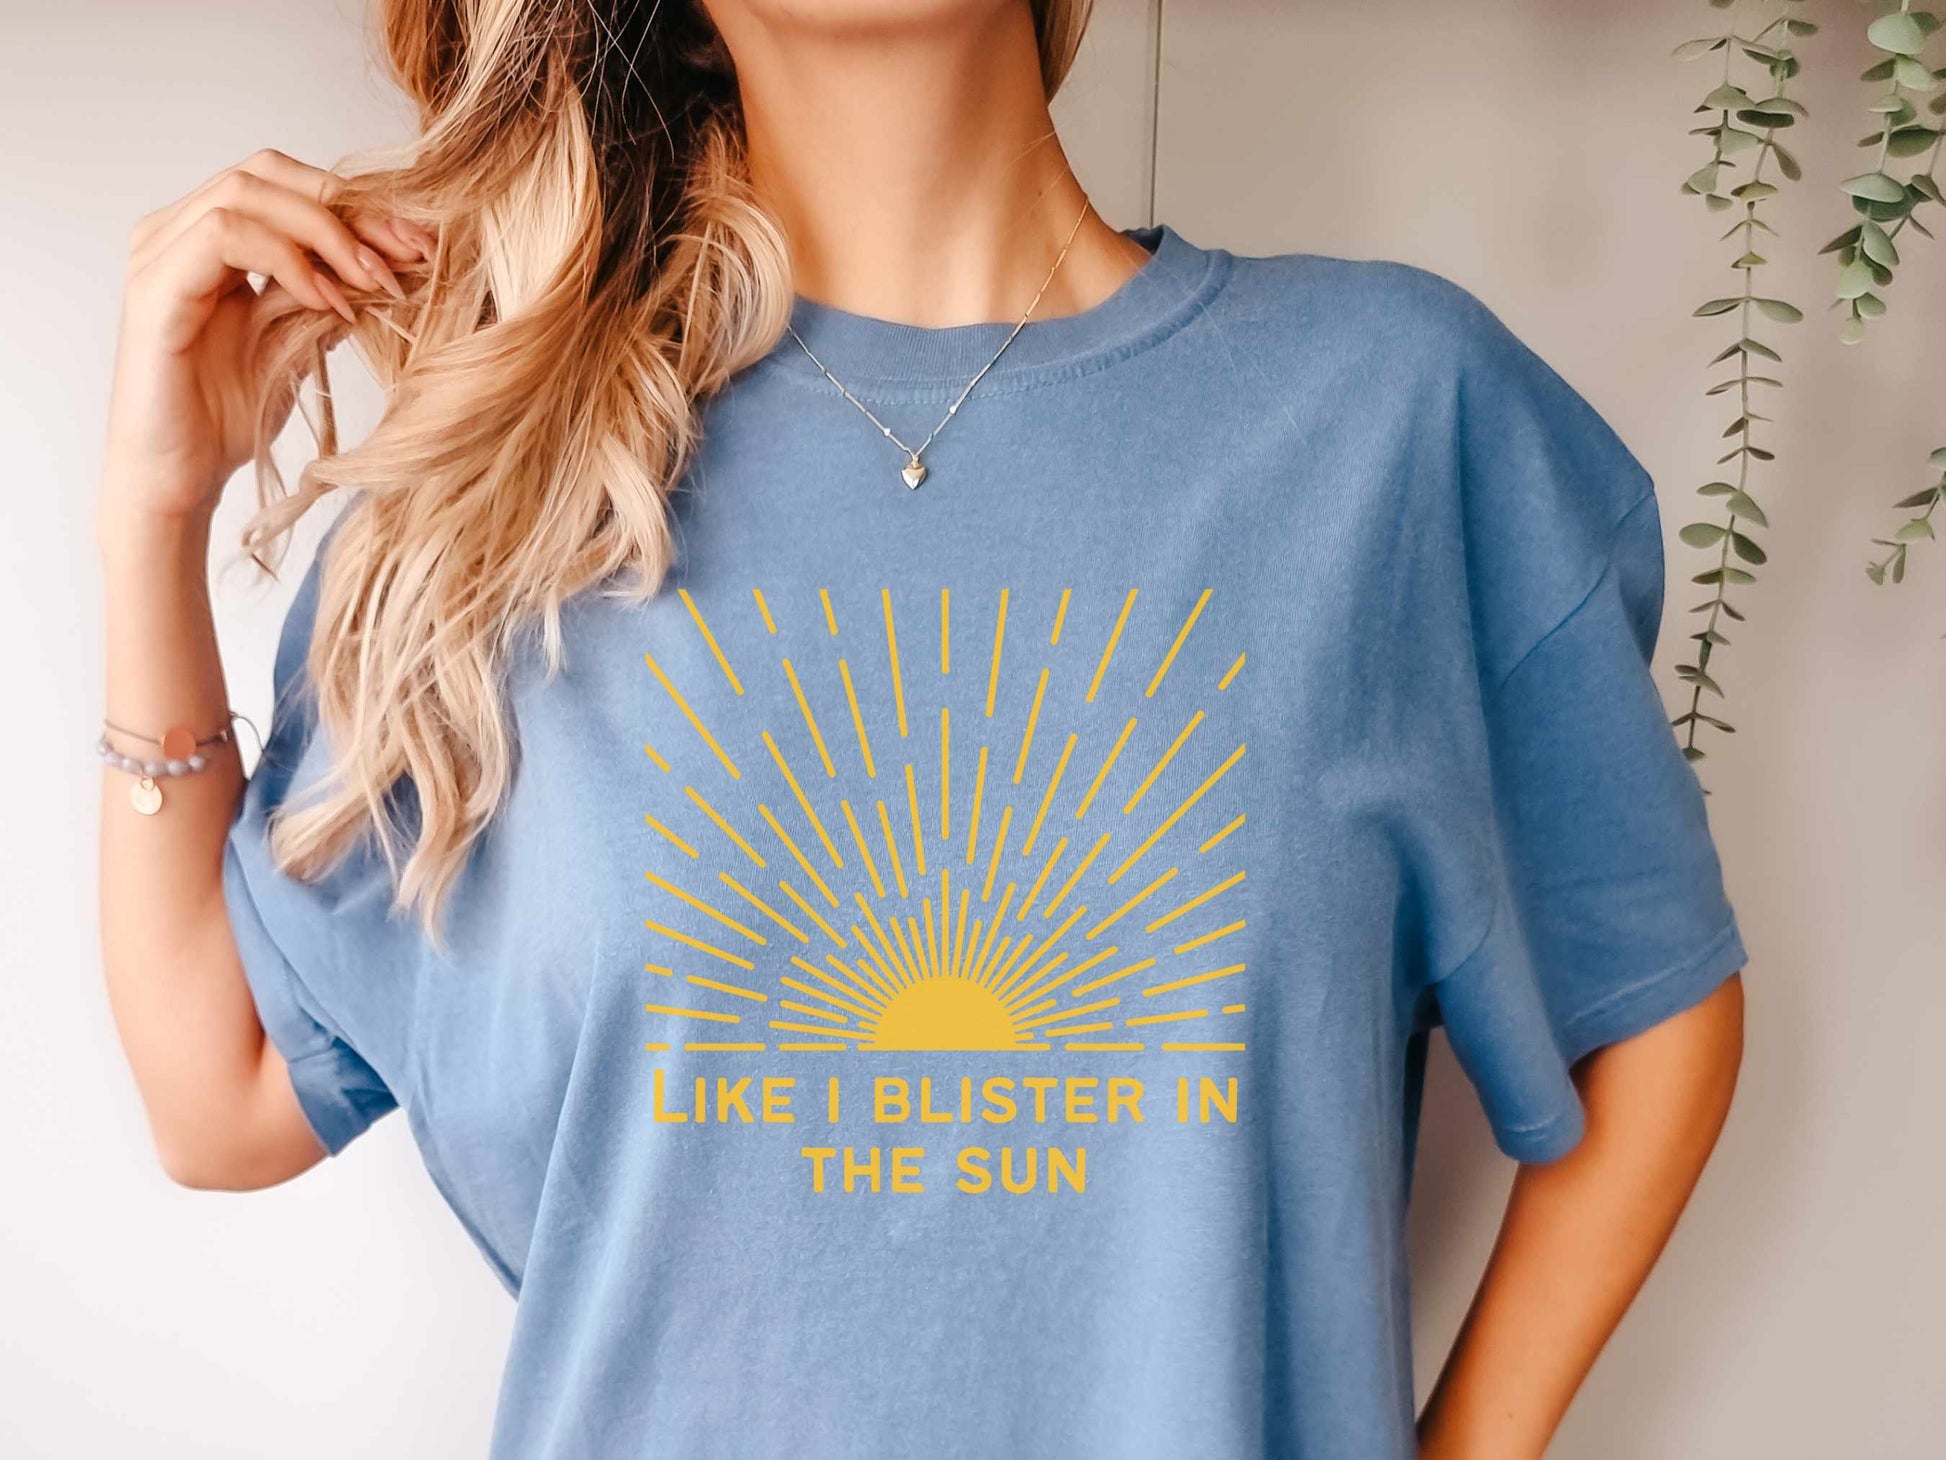 Violent Femmes "Blister in the Sun Tee" T-Shirt in Blue Jean